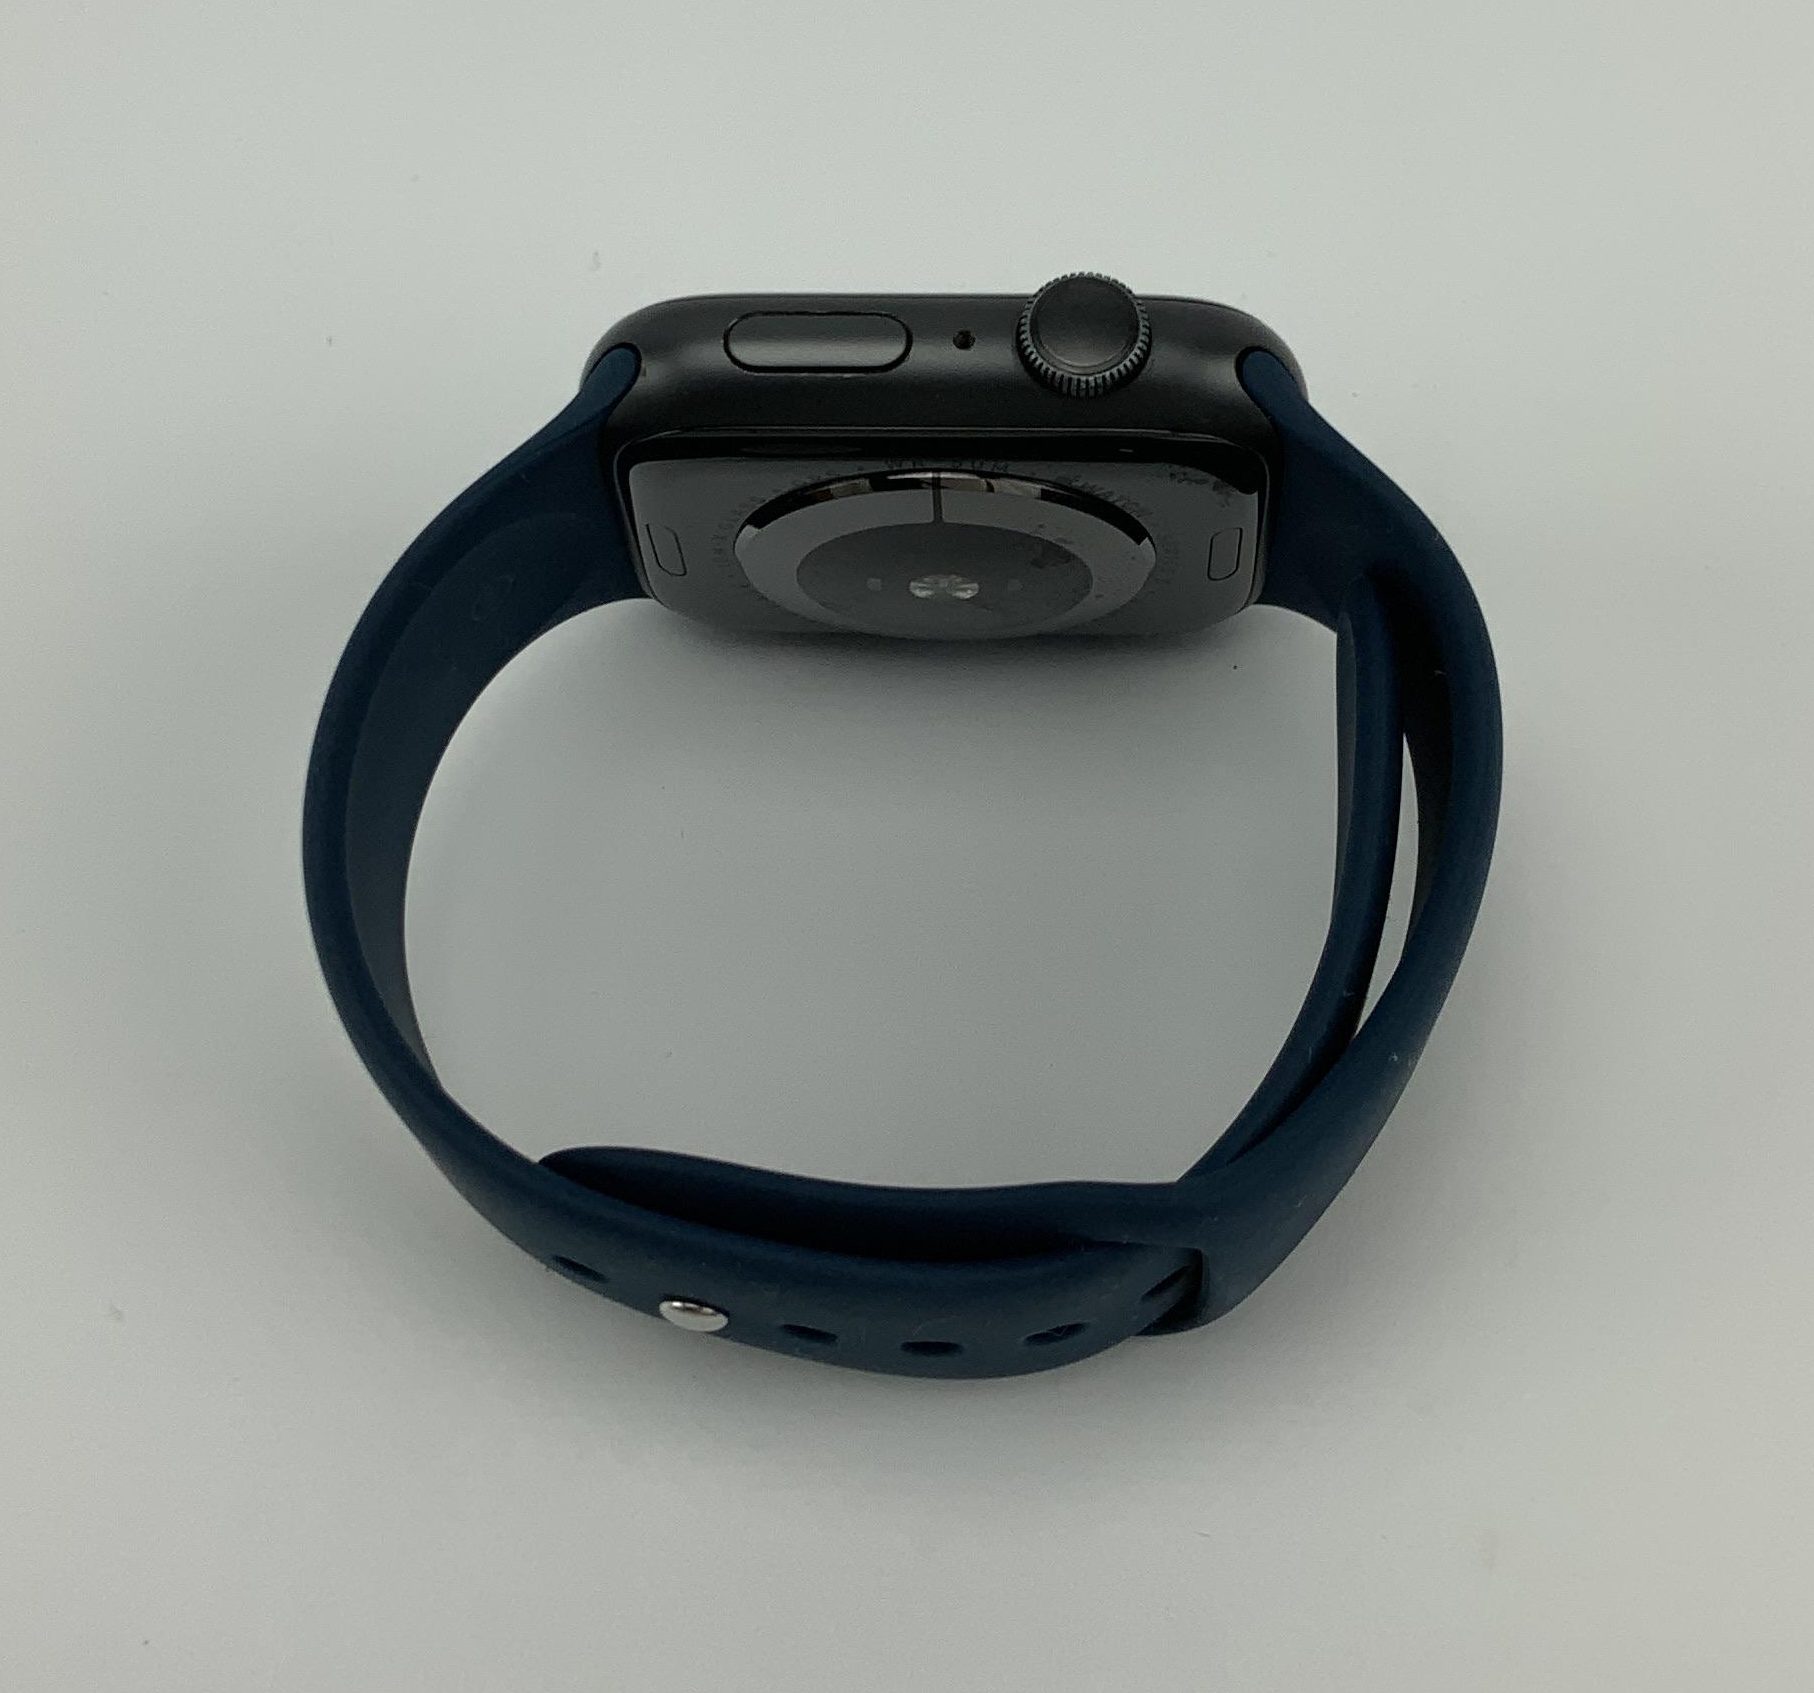 Watch Series 5 Aluminum (44mm), Space Gray, image 2